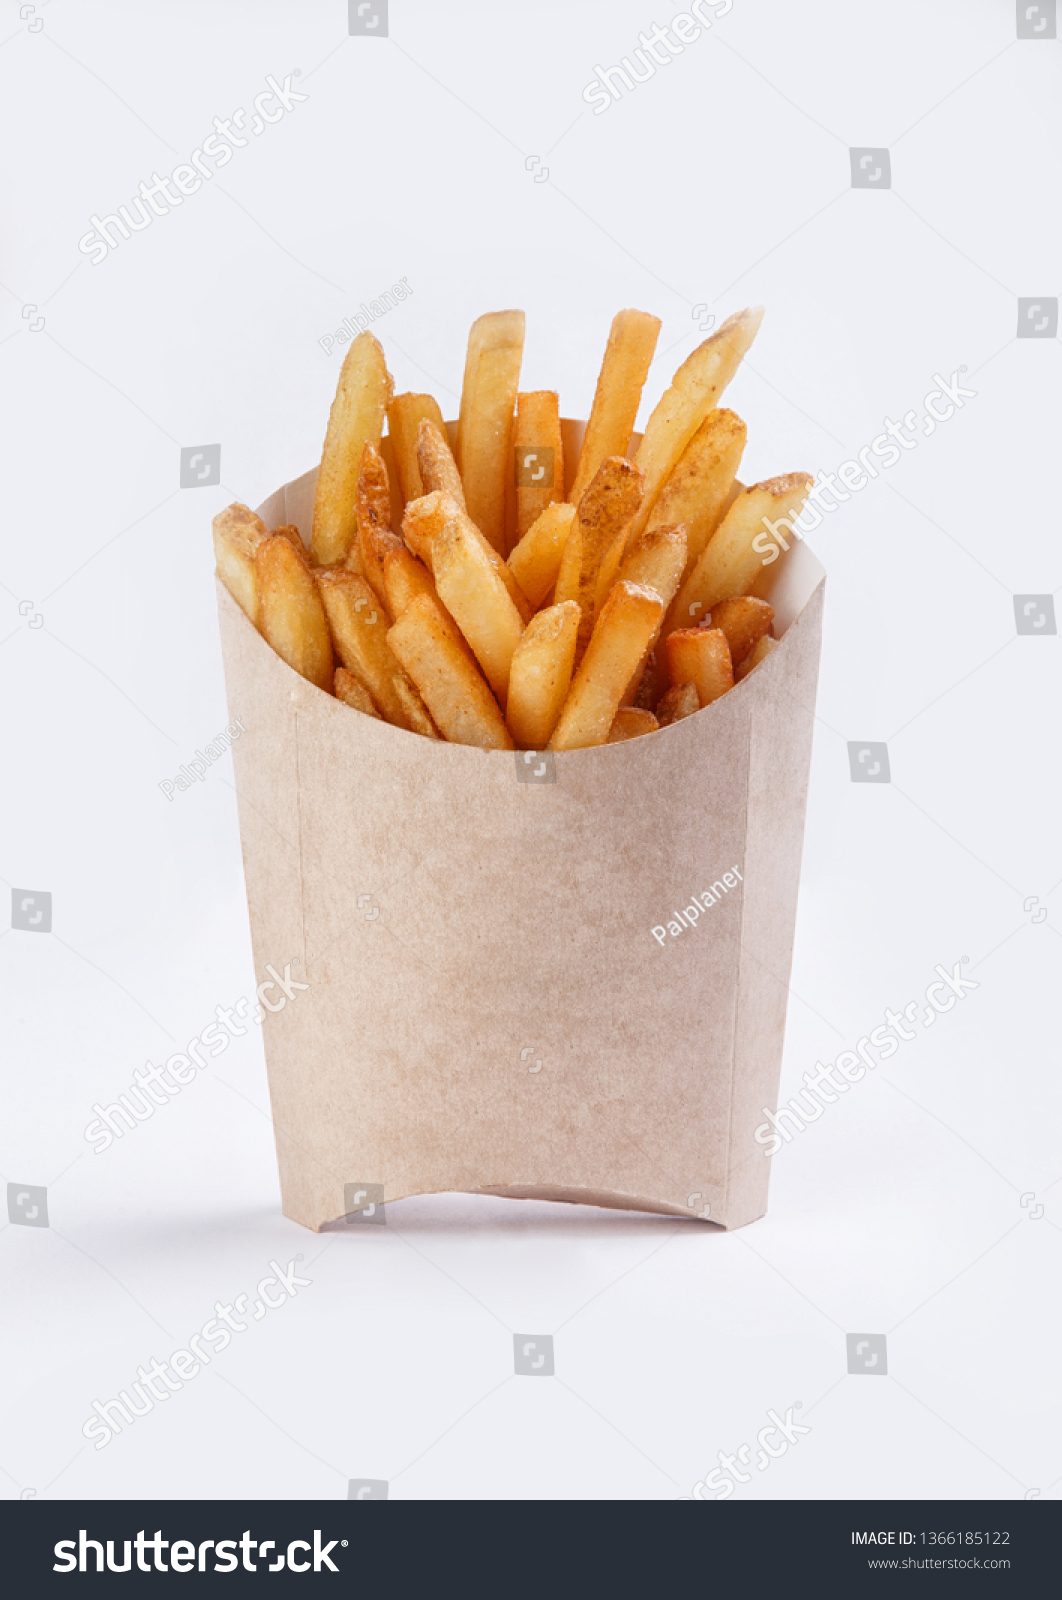 french fries in box on white background #1366185122